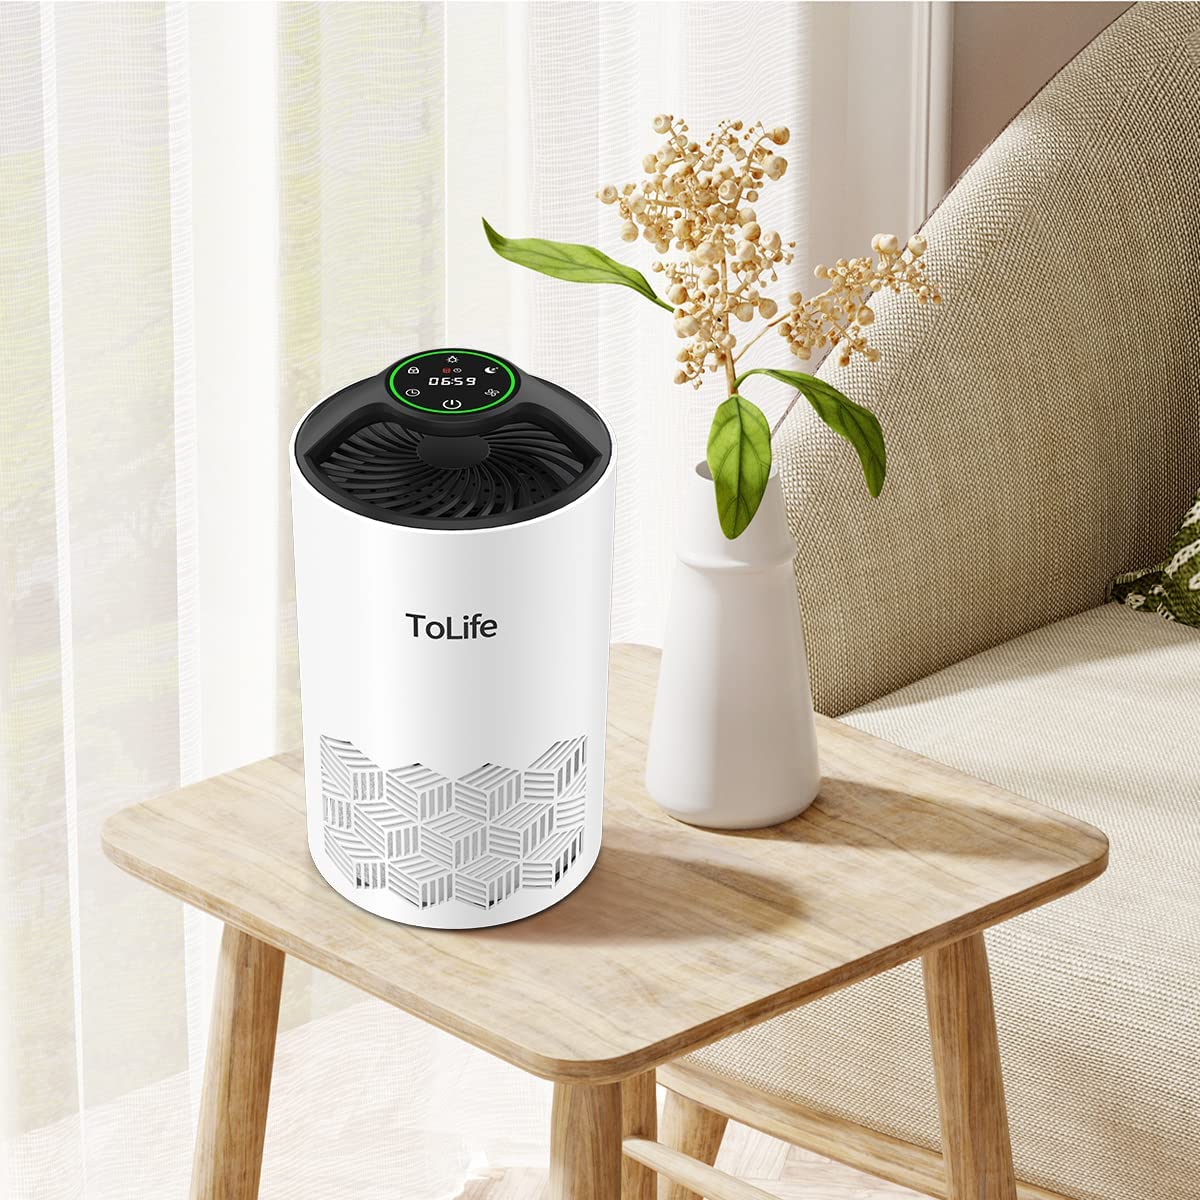 ToLife Air Purifiers for Home with H13 True HEPA Filter, Air Purifier for Home Large Room Cleans up to 215 Sq. Ft and Filters 99.9% of Allergens, Pet Dander, Dust, 25dB Quiet Air Cleaner for Bedroom- White